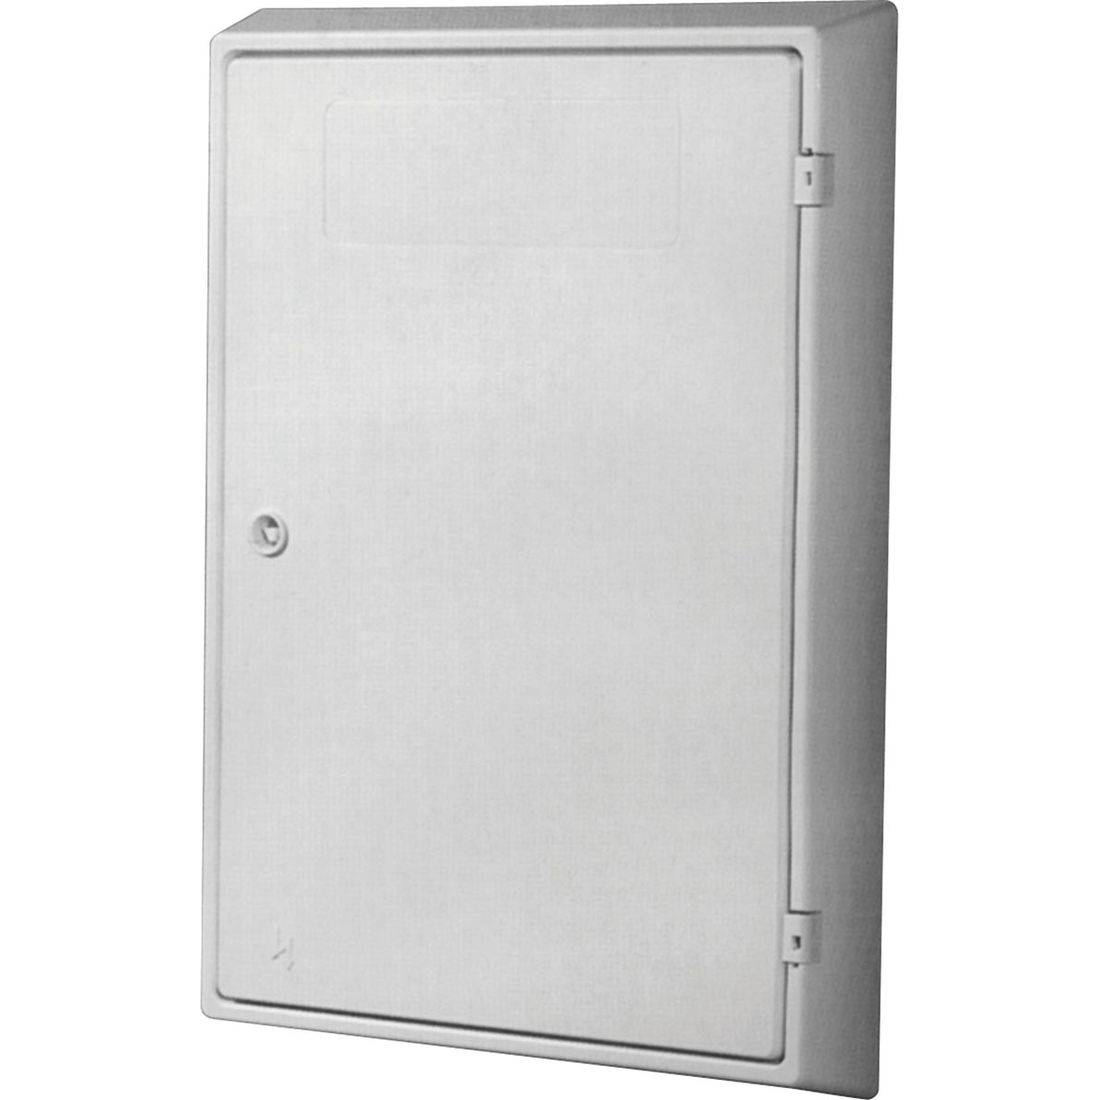 Meter Box Electric Built In White